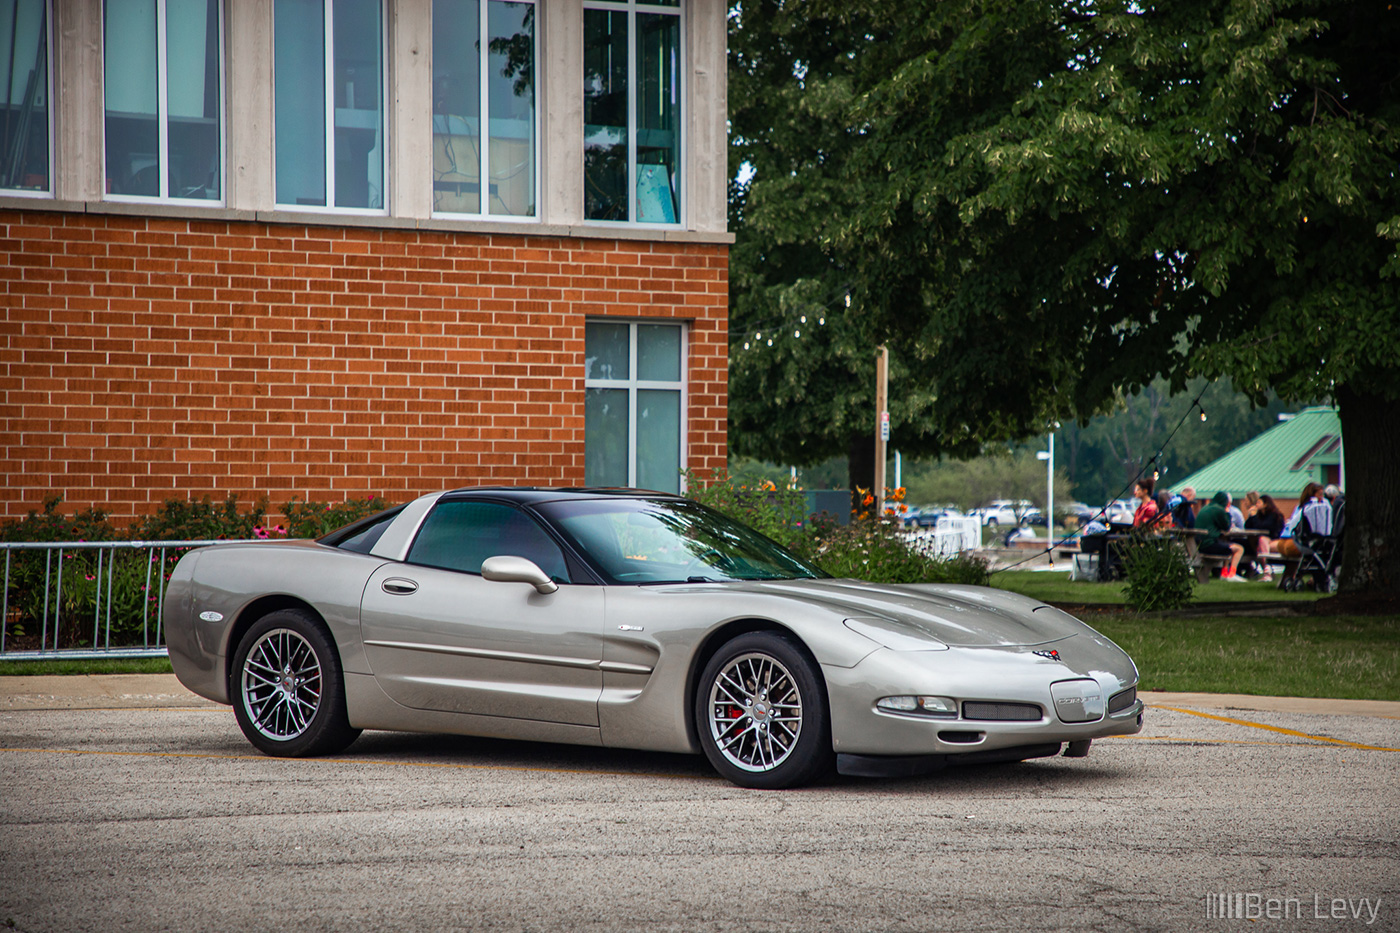 C5 Corvette at Chitown Exotics Supercars for Charity